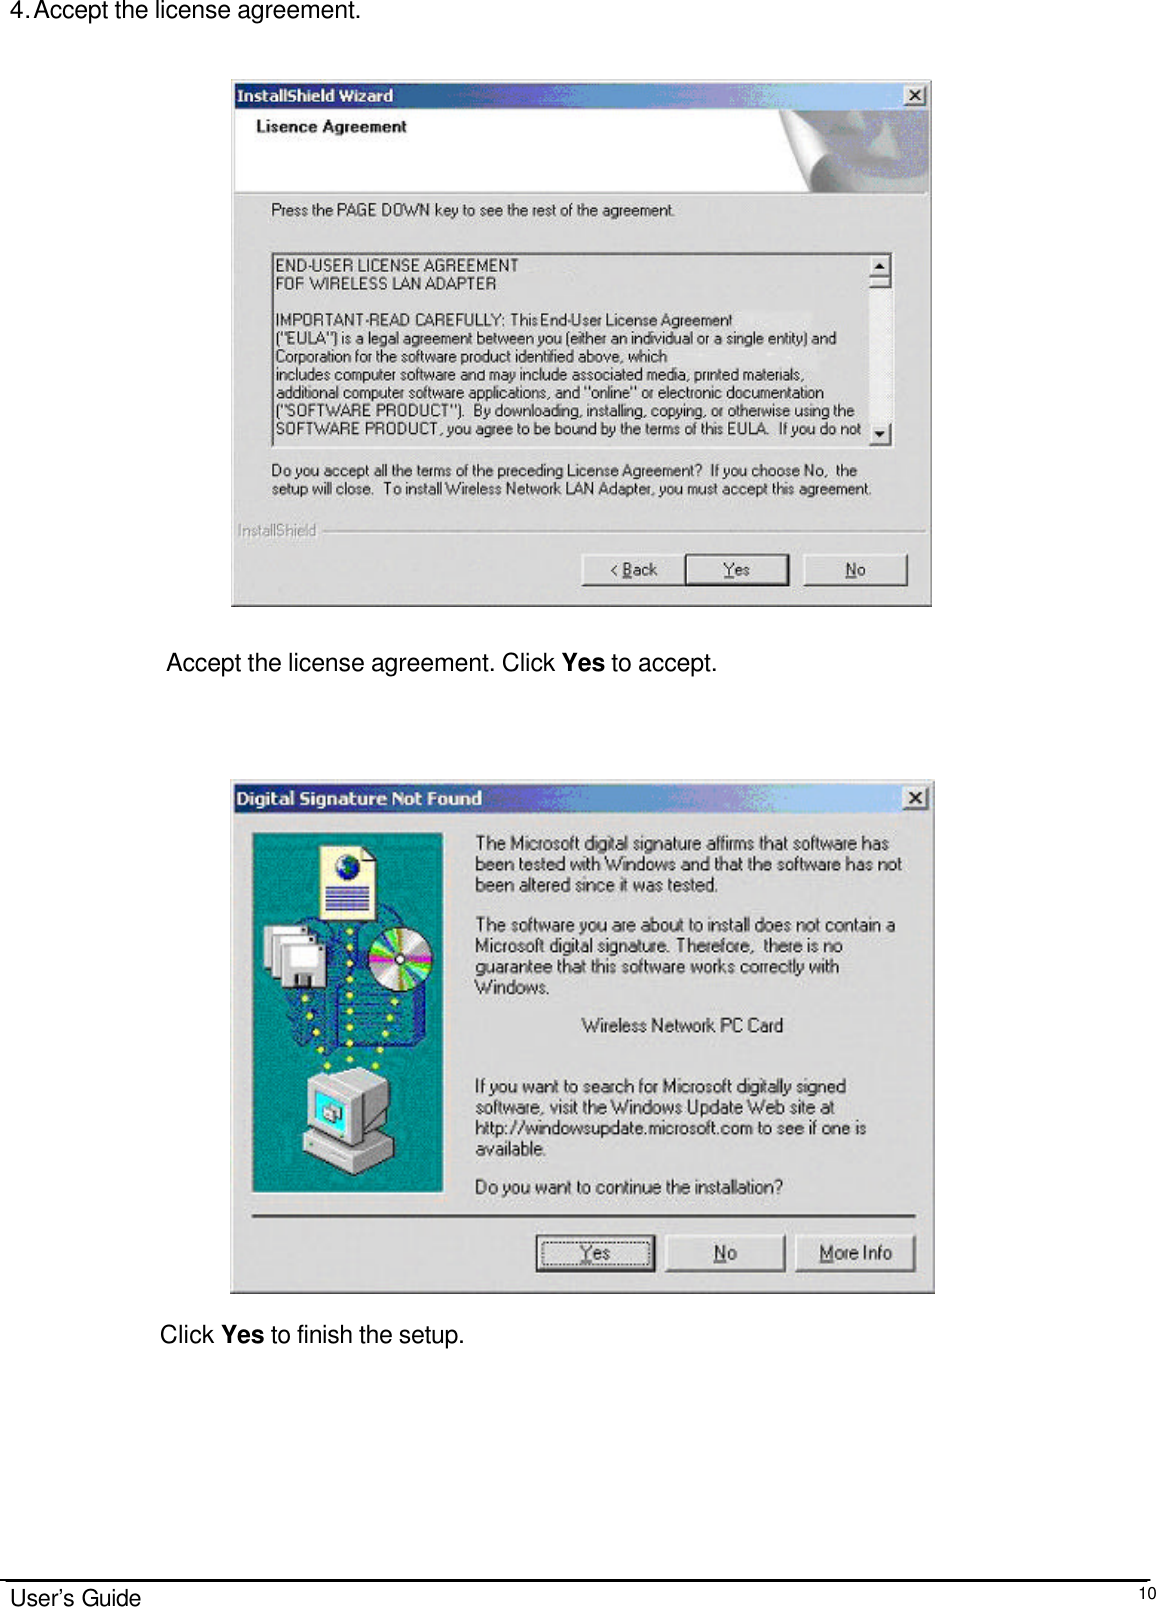                                                                                                                                                                              User’s Guide  104. Accept the license agreement.     Accept the license agreement. Click Yes to accept.                          Click Yes to finish the setup.  